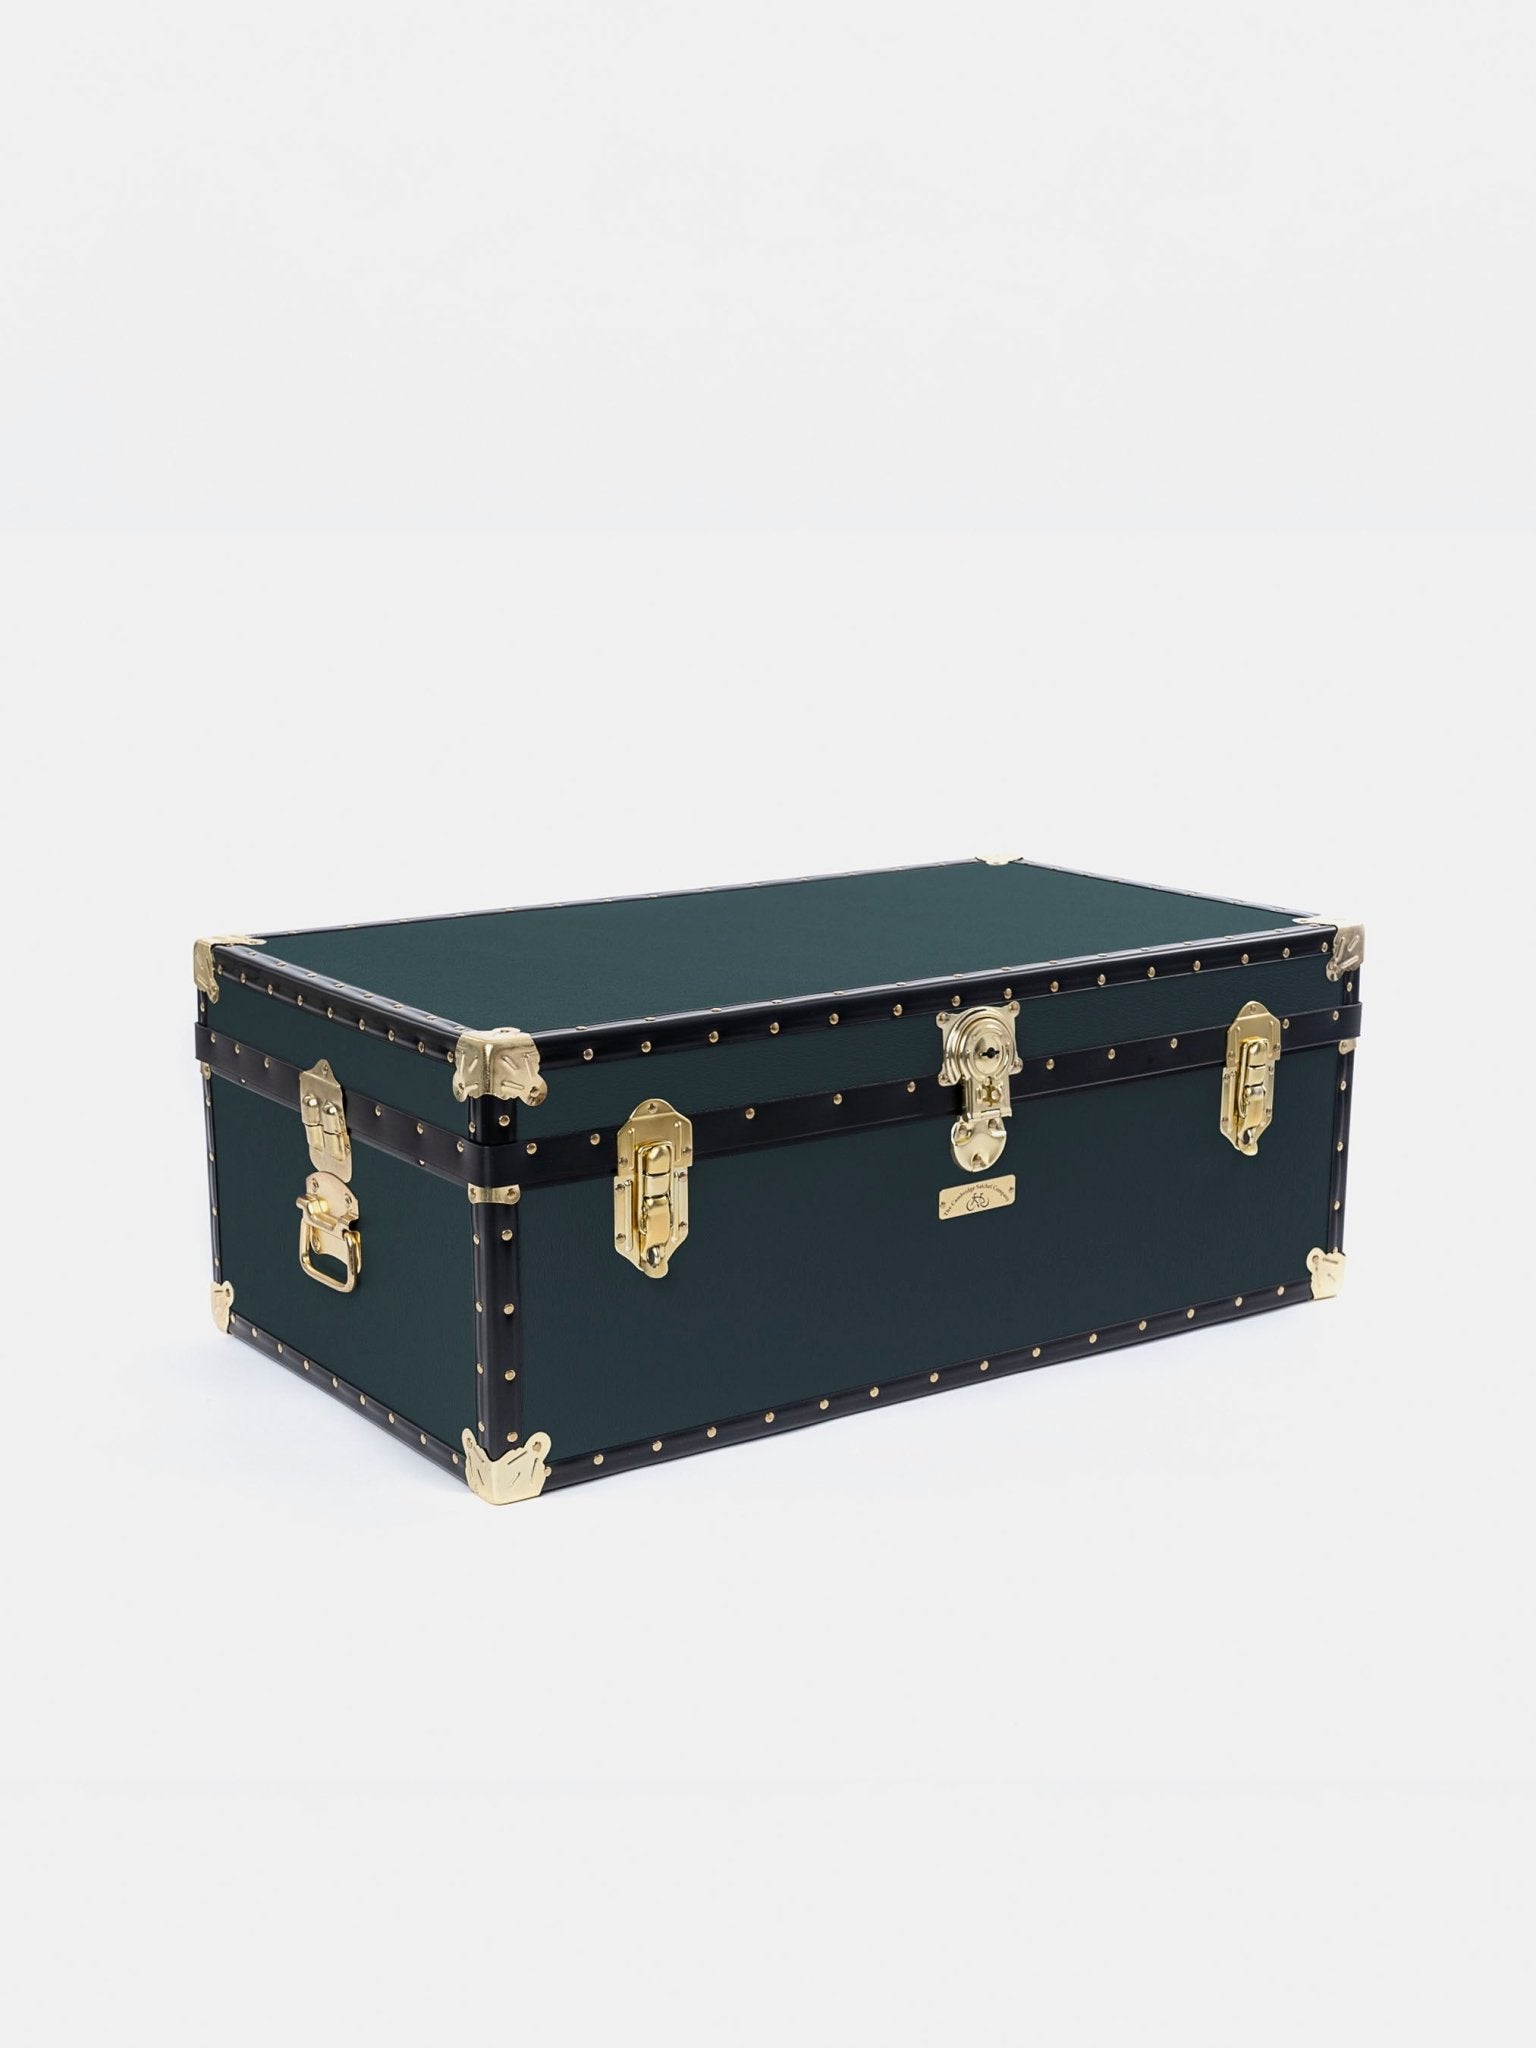 The Steamer Trunk - Forest Green - The Cambridge Satchel Company UK Store